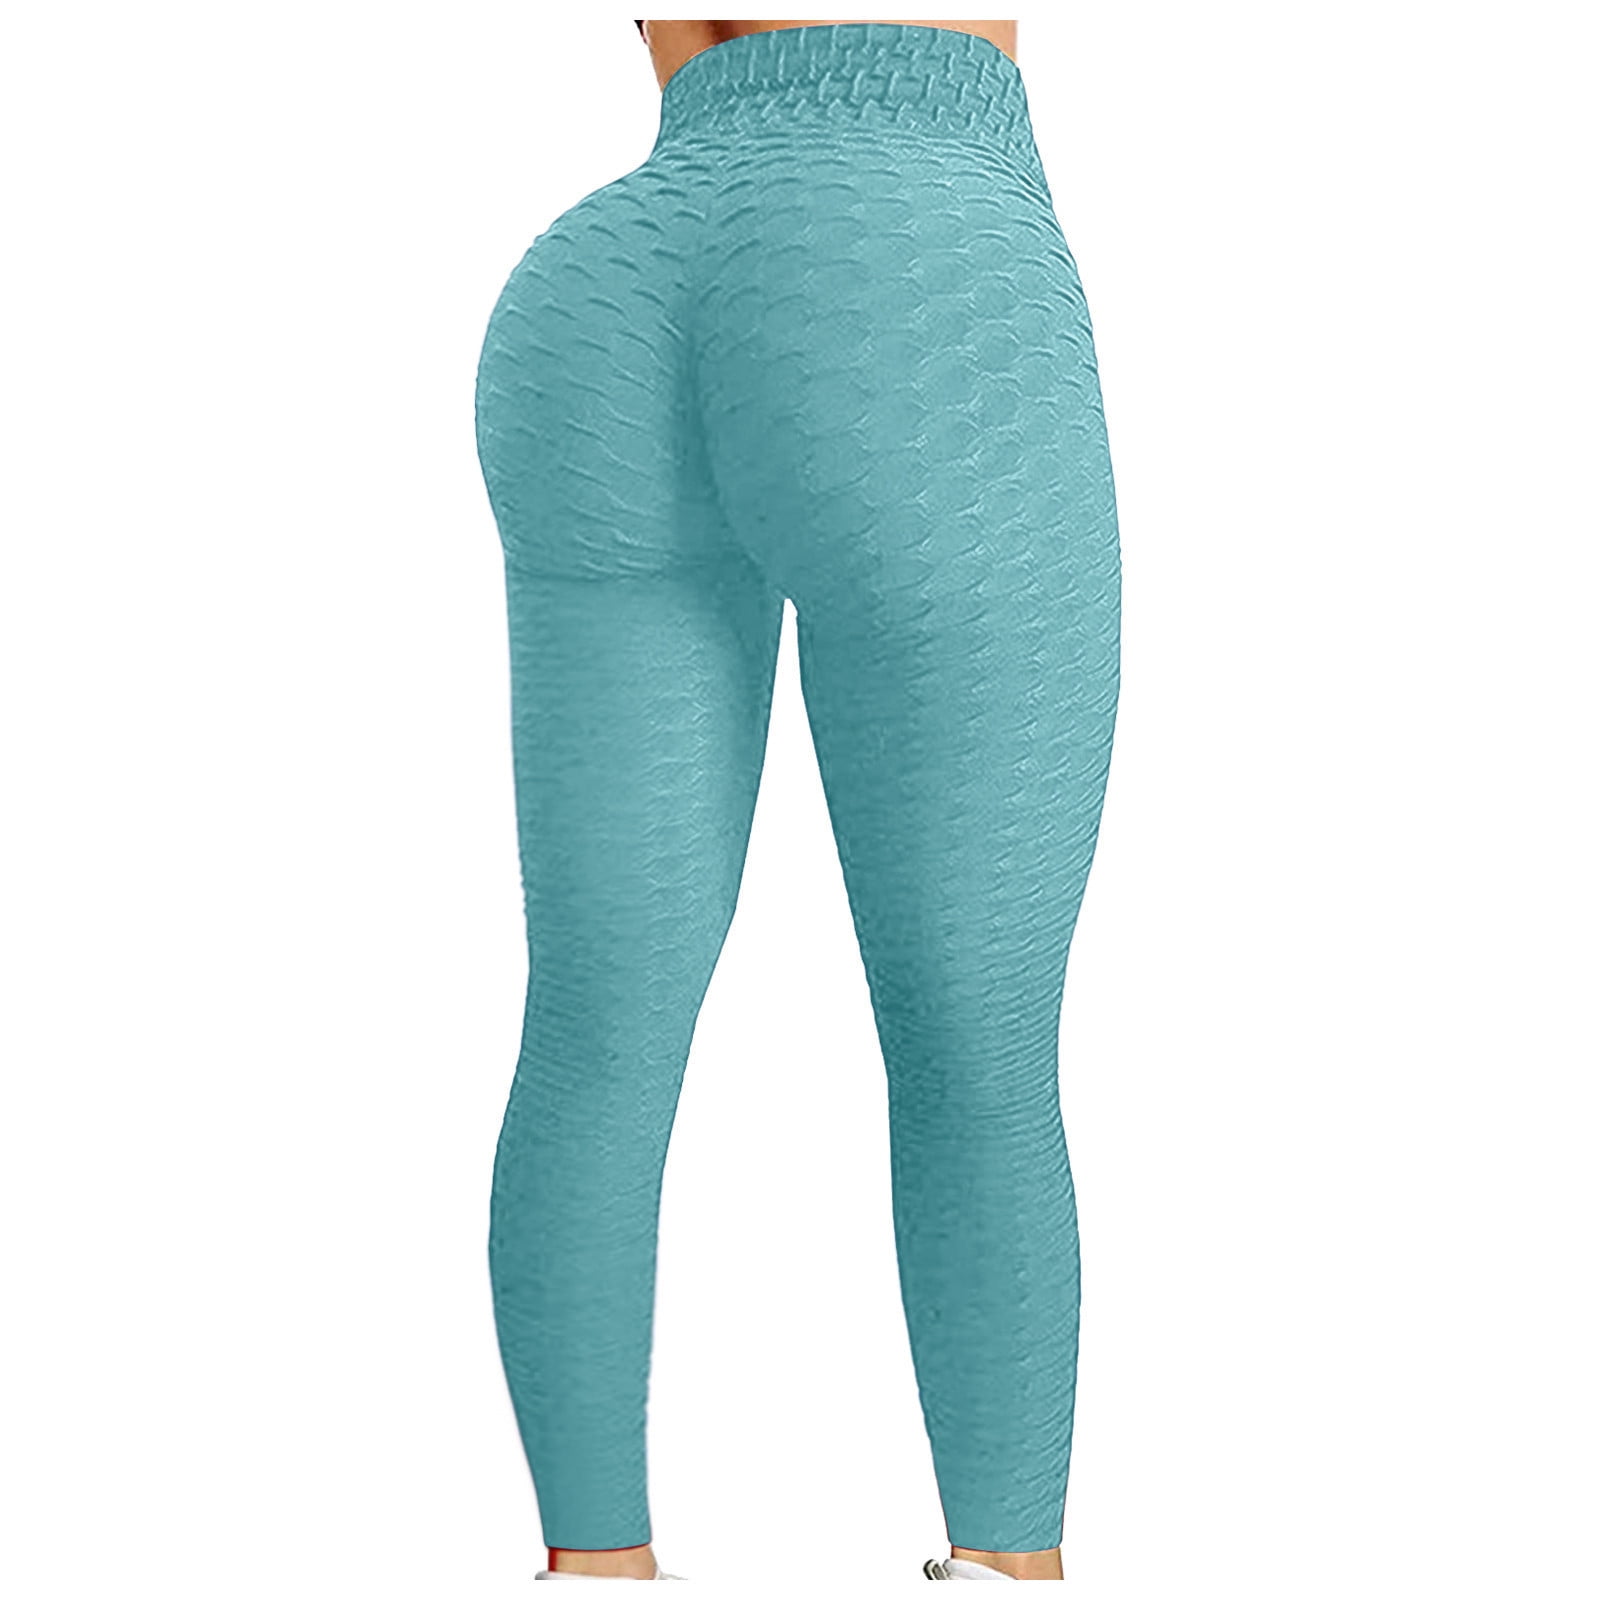 MELDVDIB Workout Leggings for Women Seamless Scrunch Tights Tummy Control  Gym Fitness Girl Sport Active Yoga Pants on Clearance 